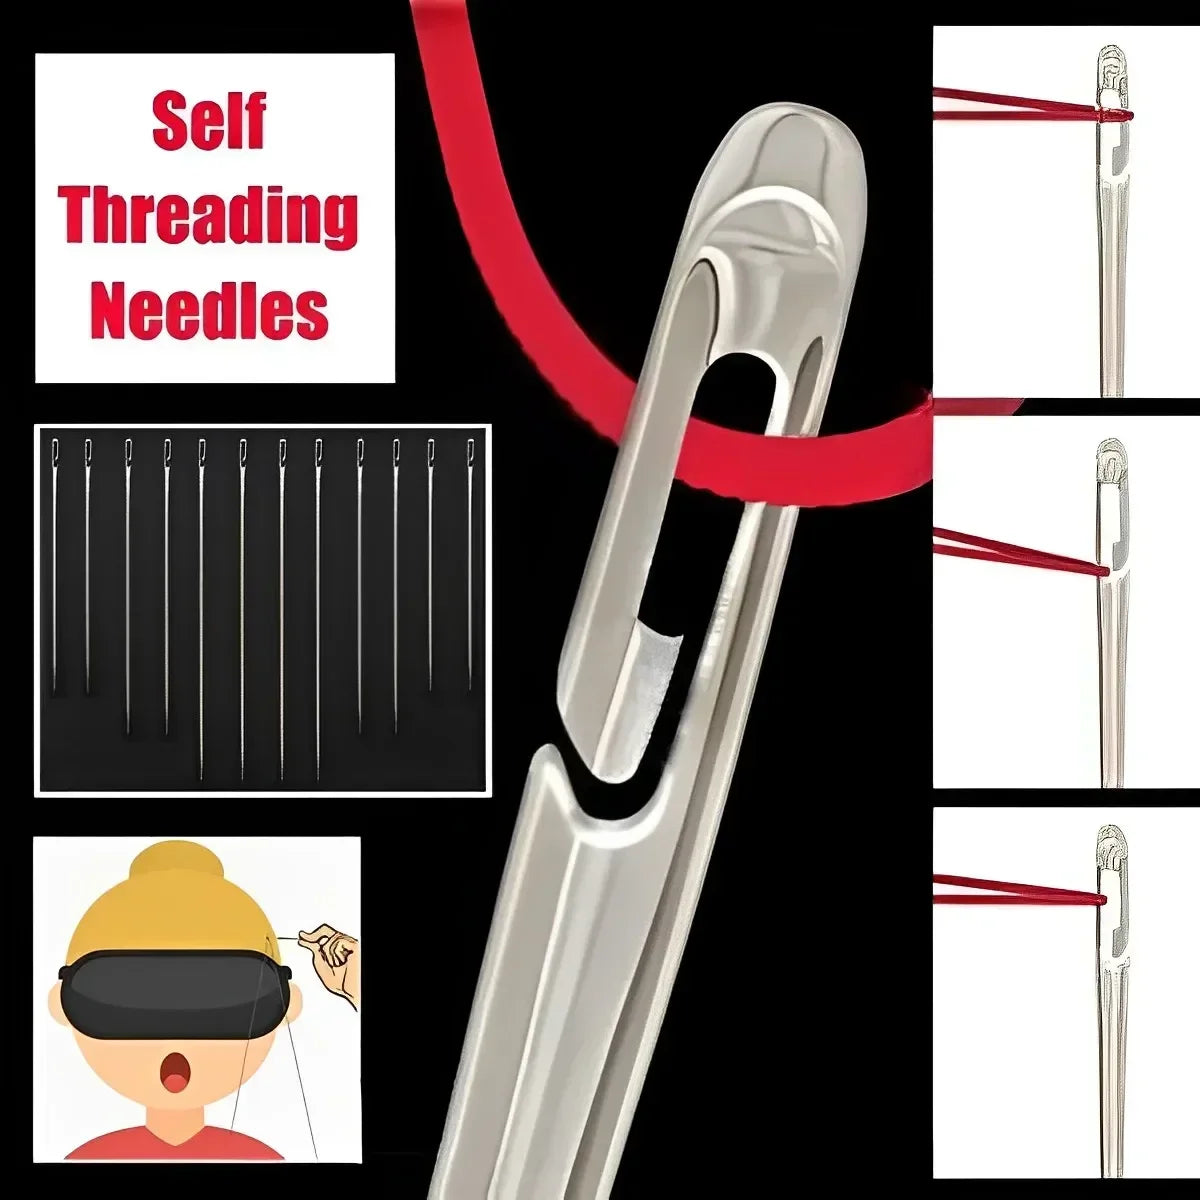 Blind Sewing Needles: Upgrade Your Sewing Game with Self-Threading Stainless Steel Needles  ourlum.com   